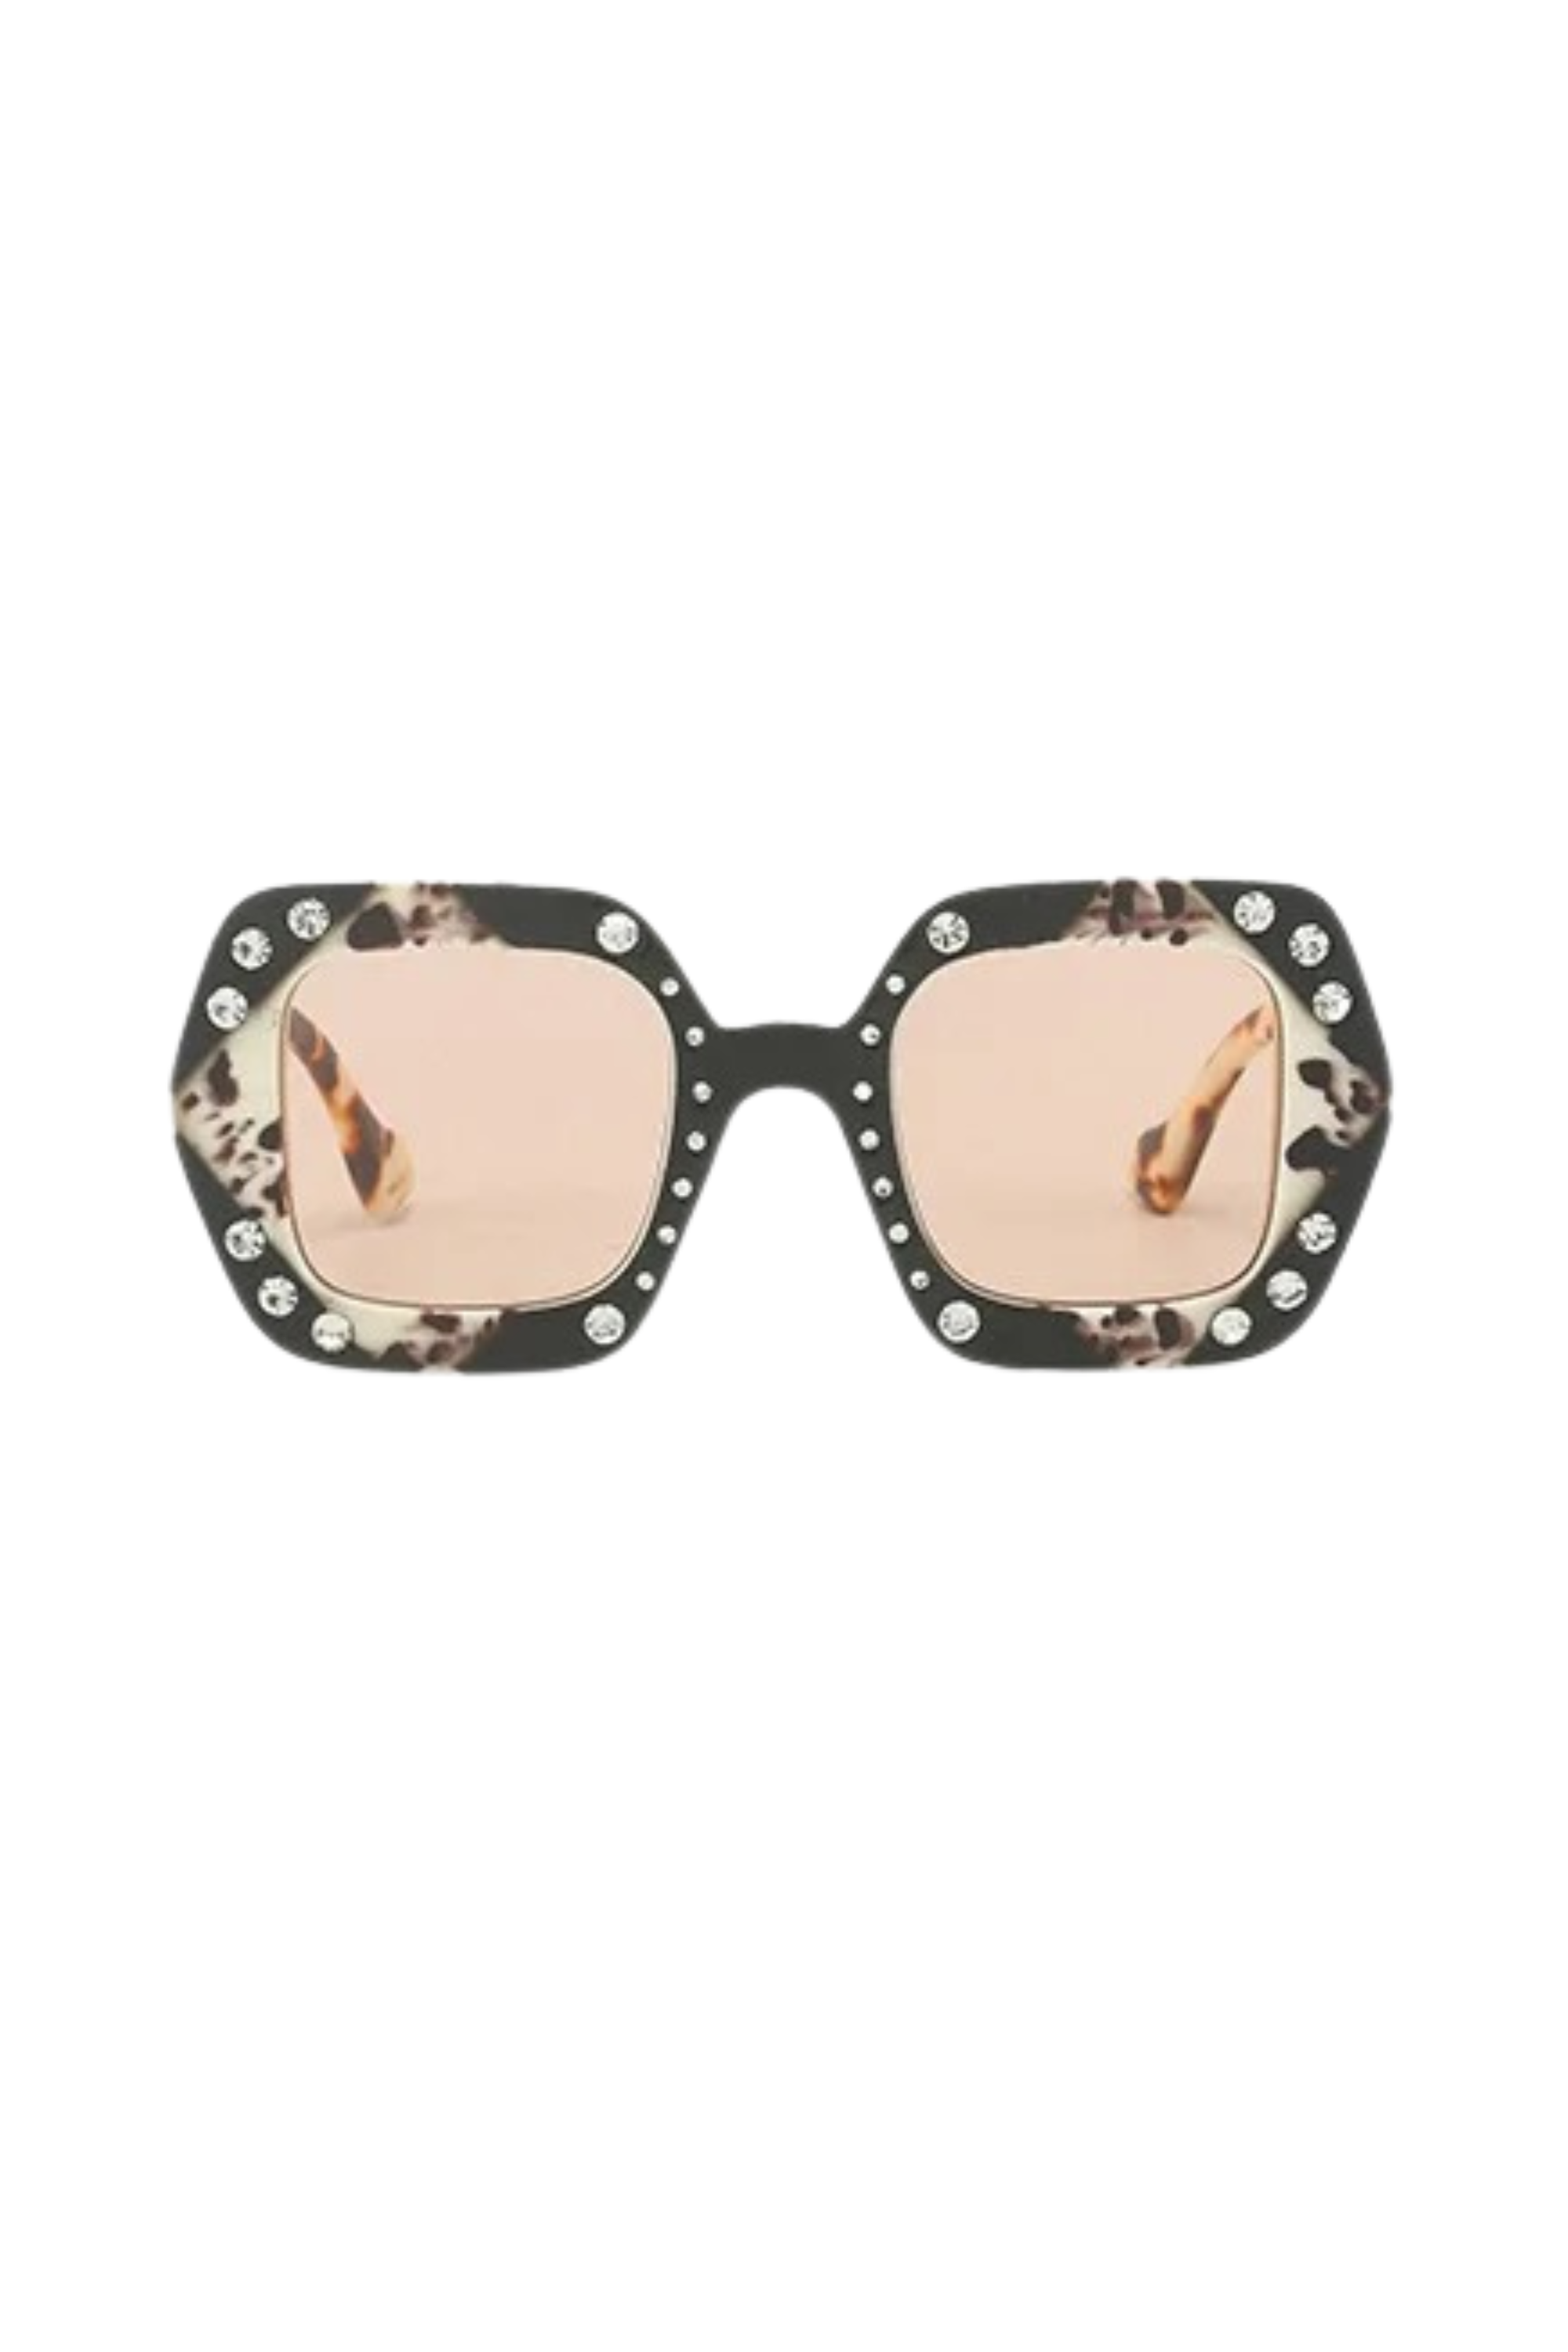 GOLDxTEAL oversized square frame sunglasses with stone embellishments.